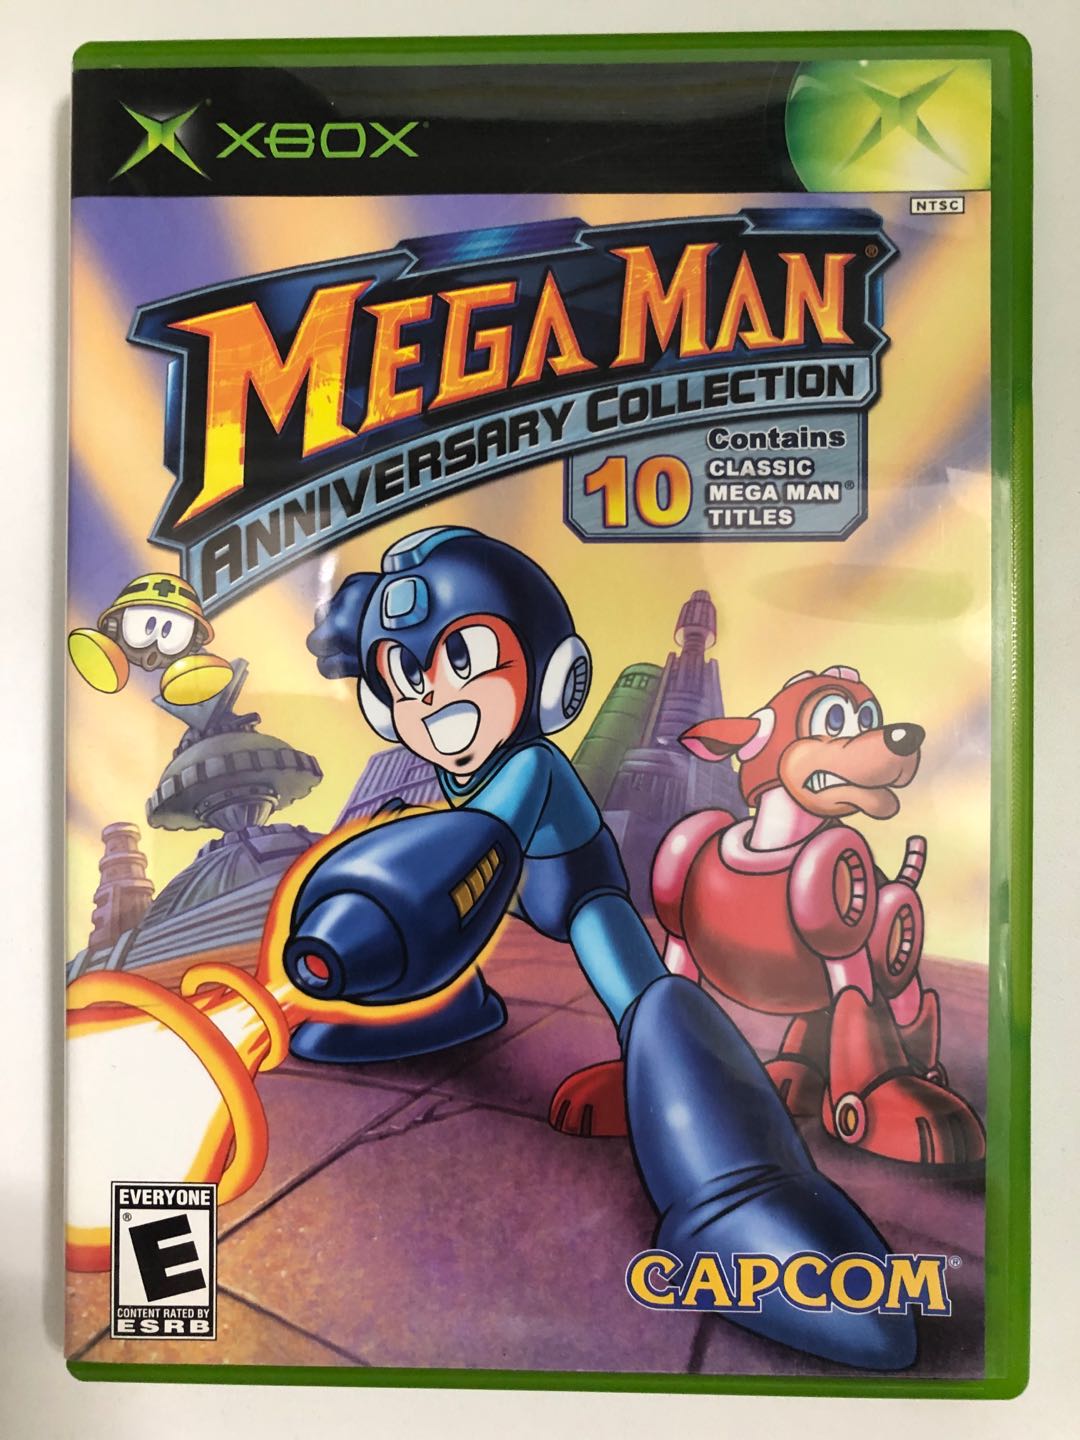 PS2ソフト 北米版ロックマン MEGAMAN Collection